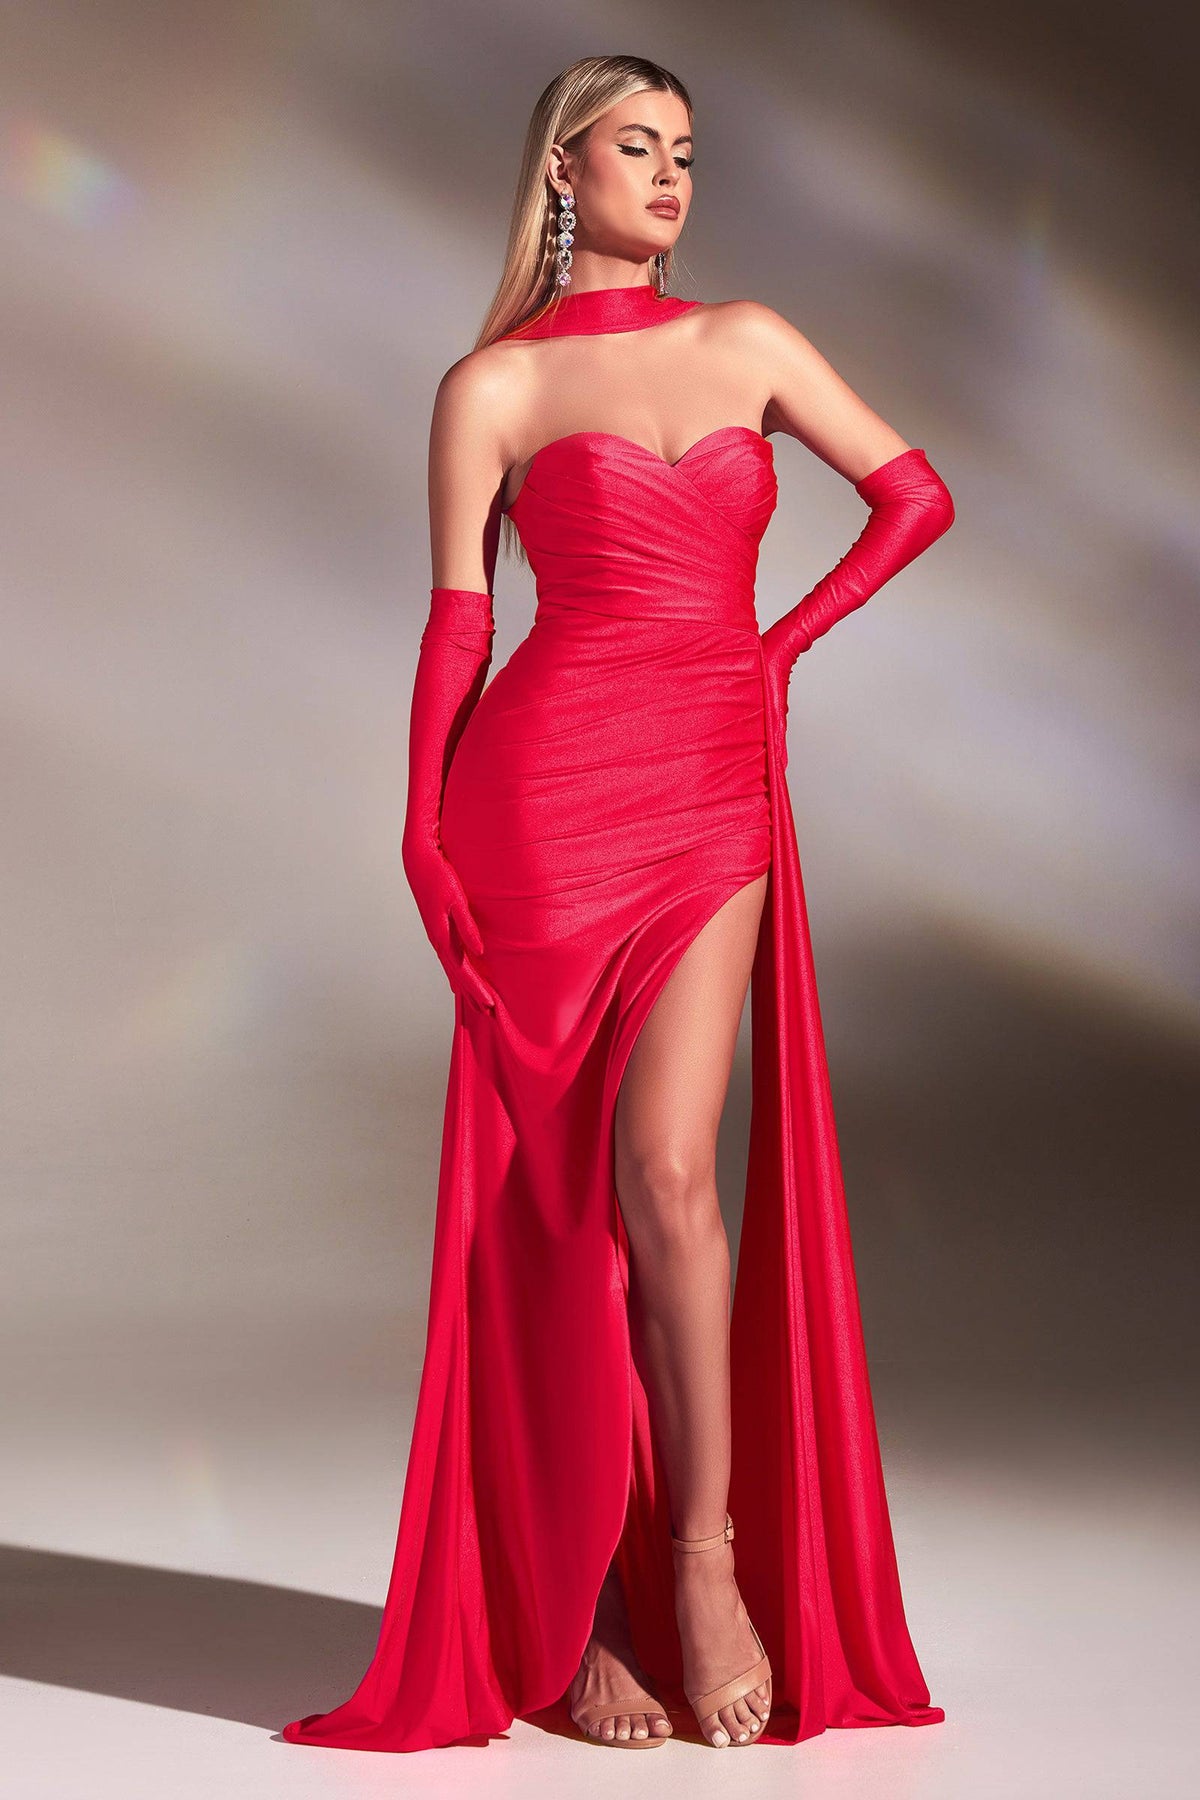 Cinderella Divine CD886 Strapless Ruched Dress In 10 Colors - NORMA REED